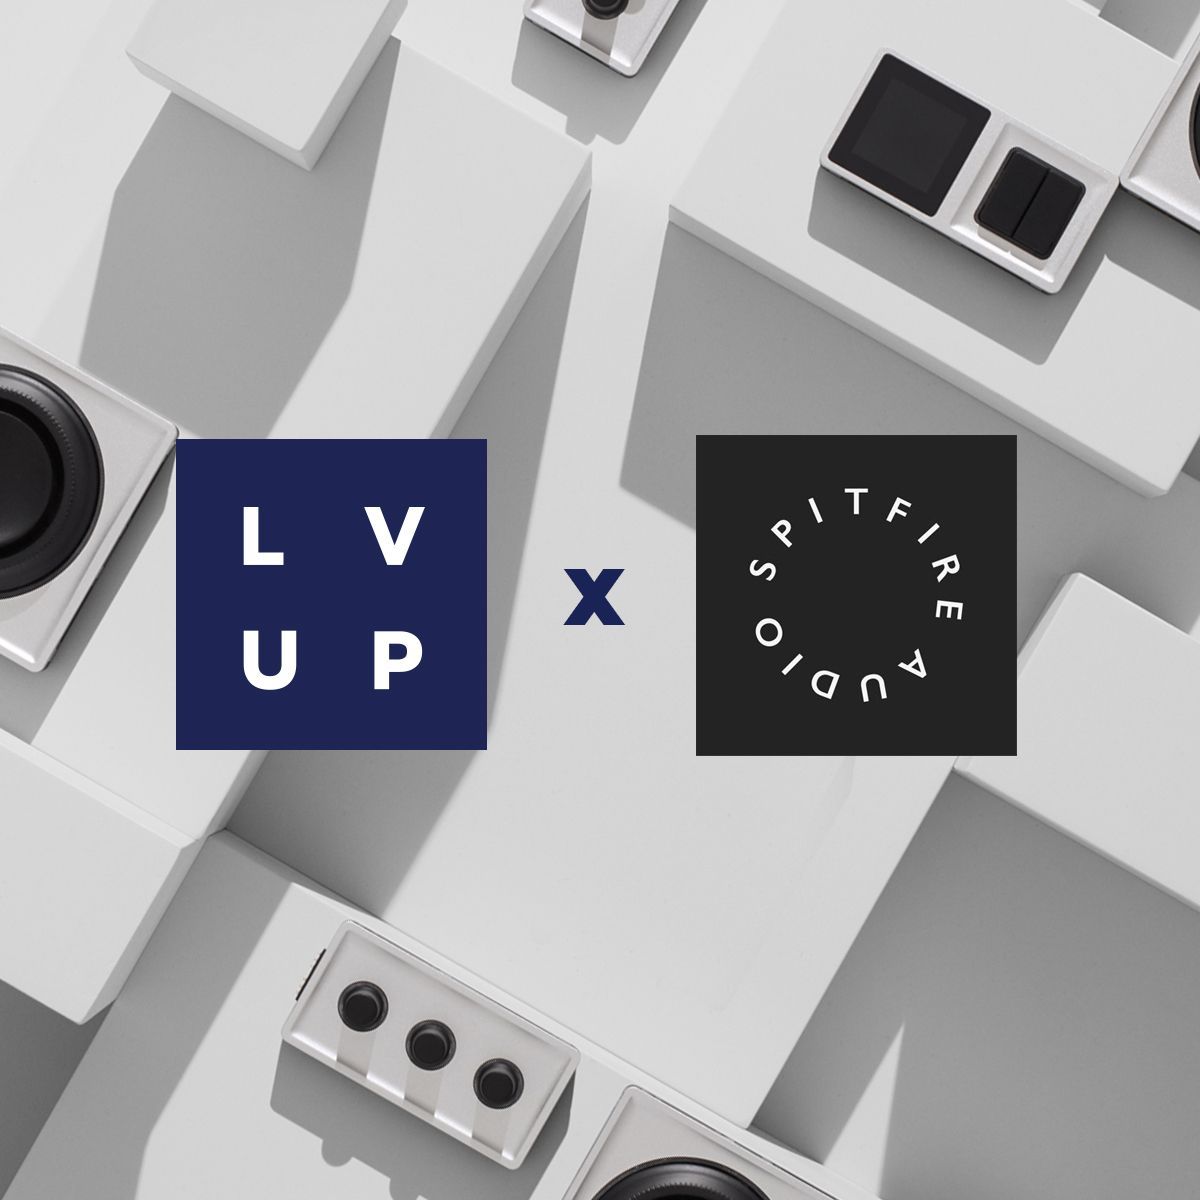 LV UP with Monogram: Spitfire Audio and MIDI Automation